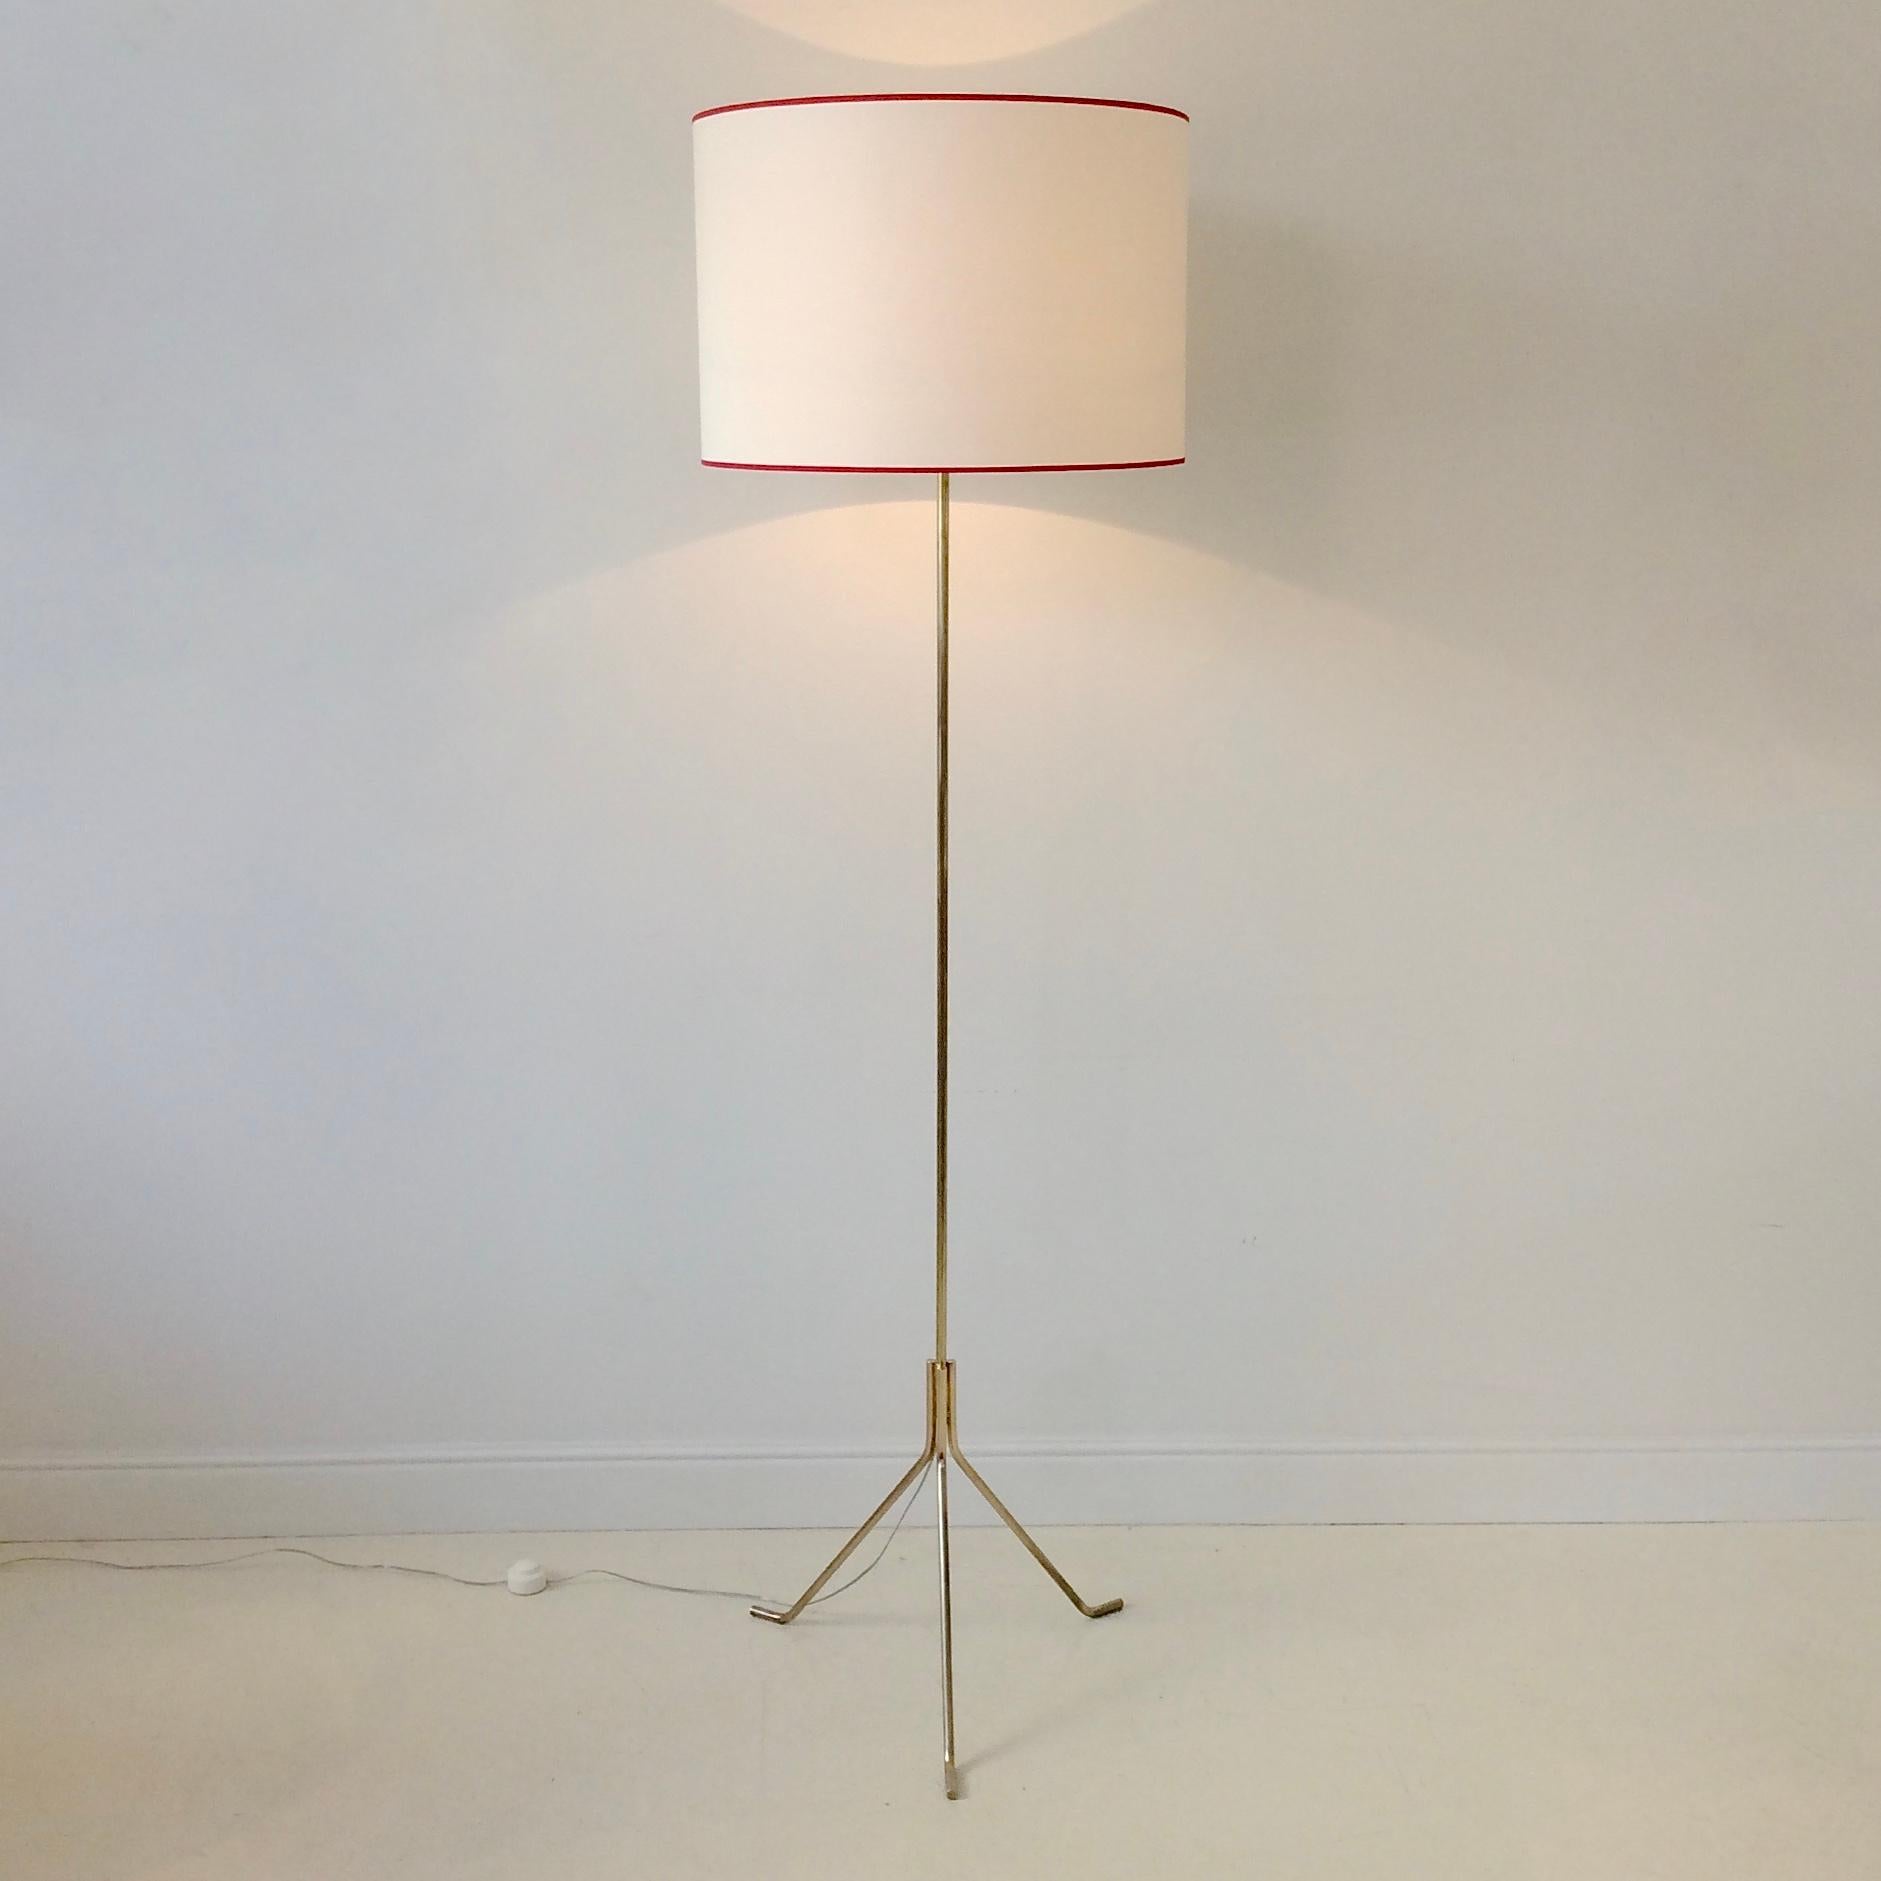 Elegant mid-century floor lamp, circa 1950, France.
Tripod base in polished brass, new ivory fabric shade with thin red fabric edge.
Rewired, one E27 bulb of 60W.
Dimensions: 175 cm H, diameter: 50 cm.
All purchases are covered by our Buyer